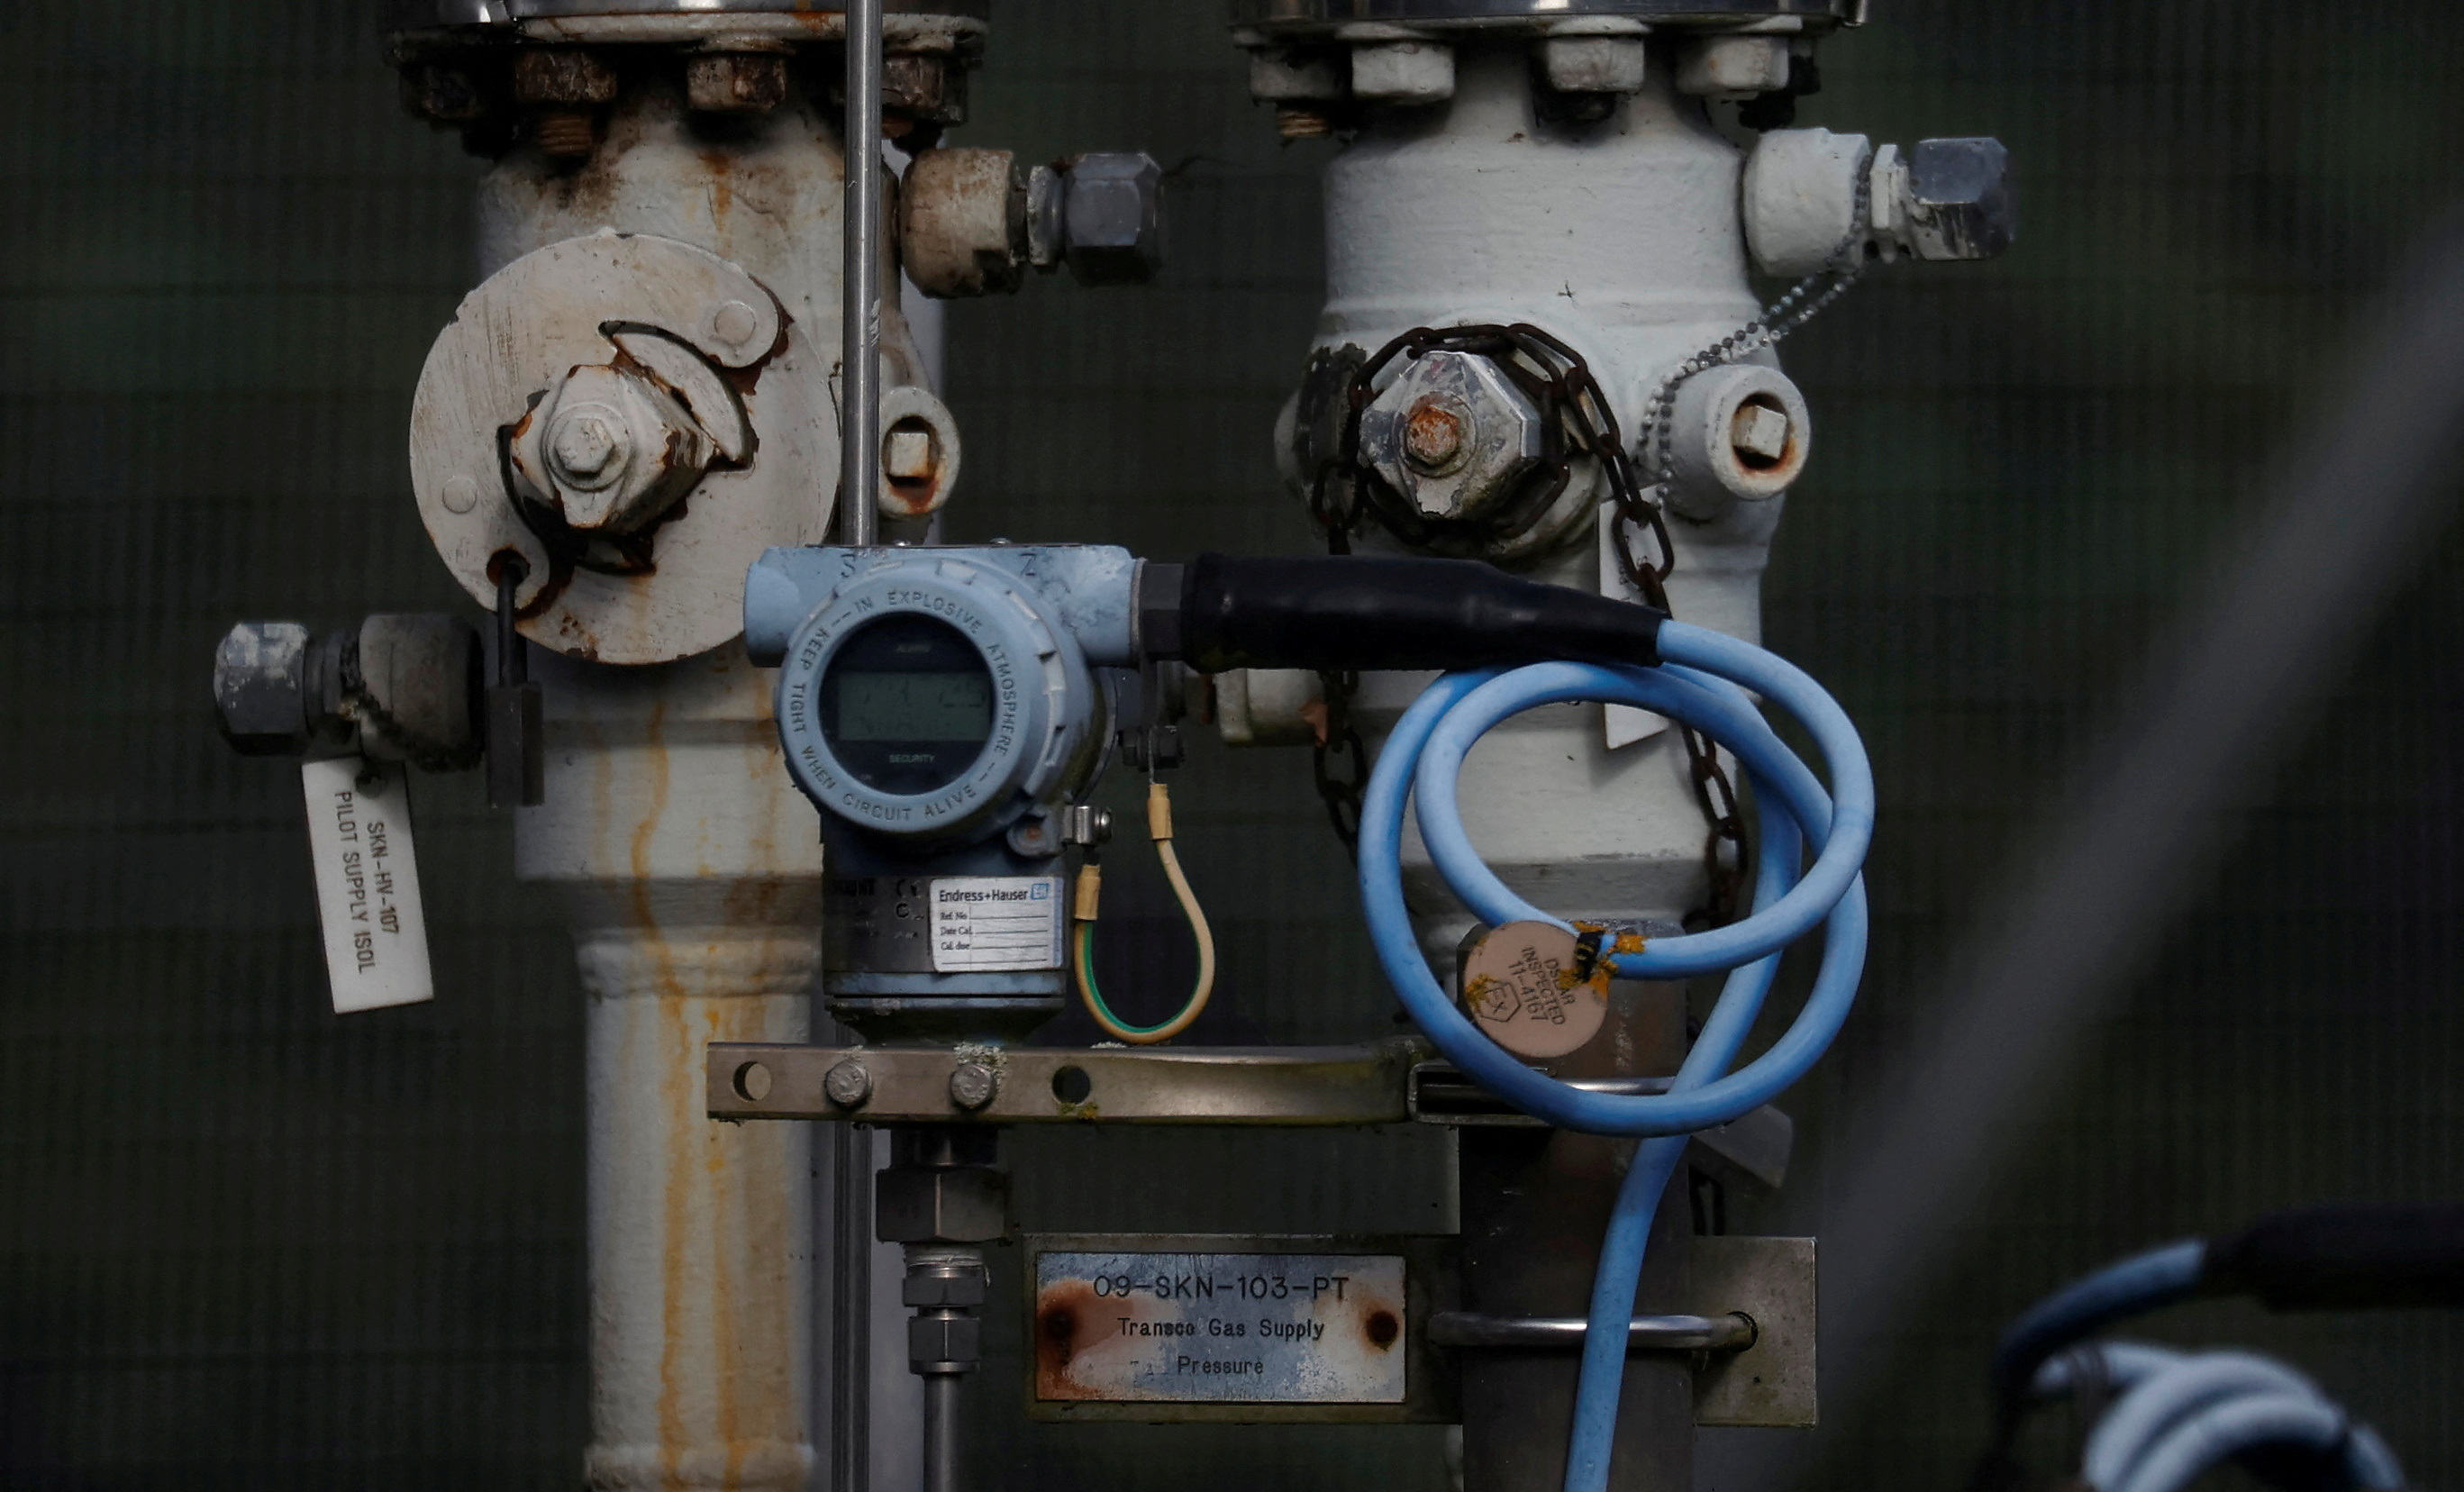 Dials and valves are seen near a section of gas pipeline at a National Grid facility near Knutsford